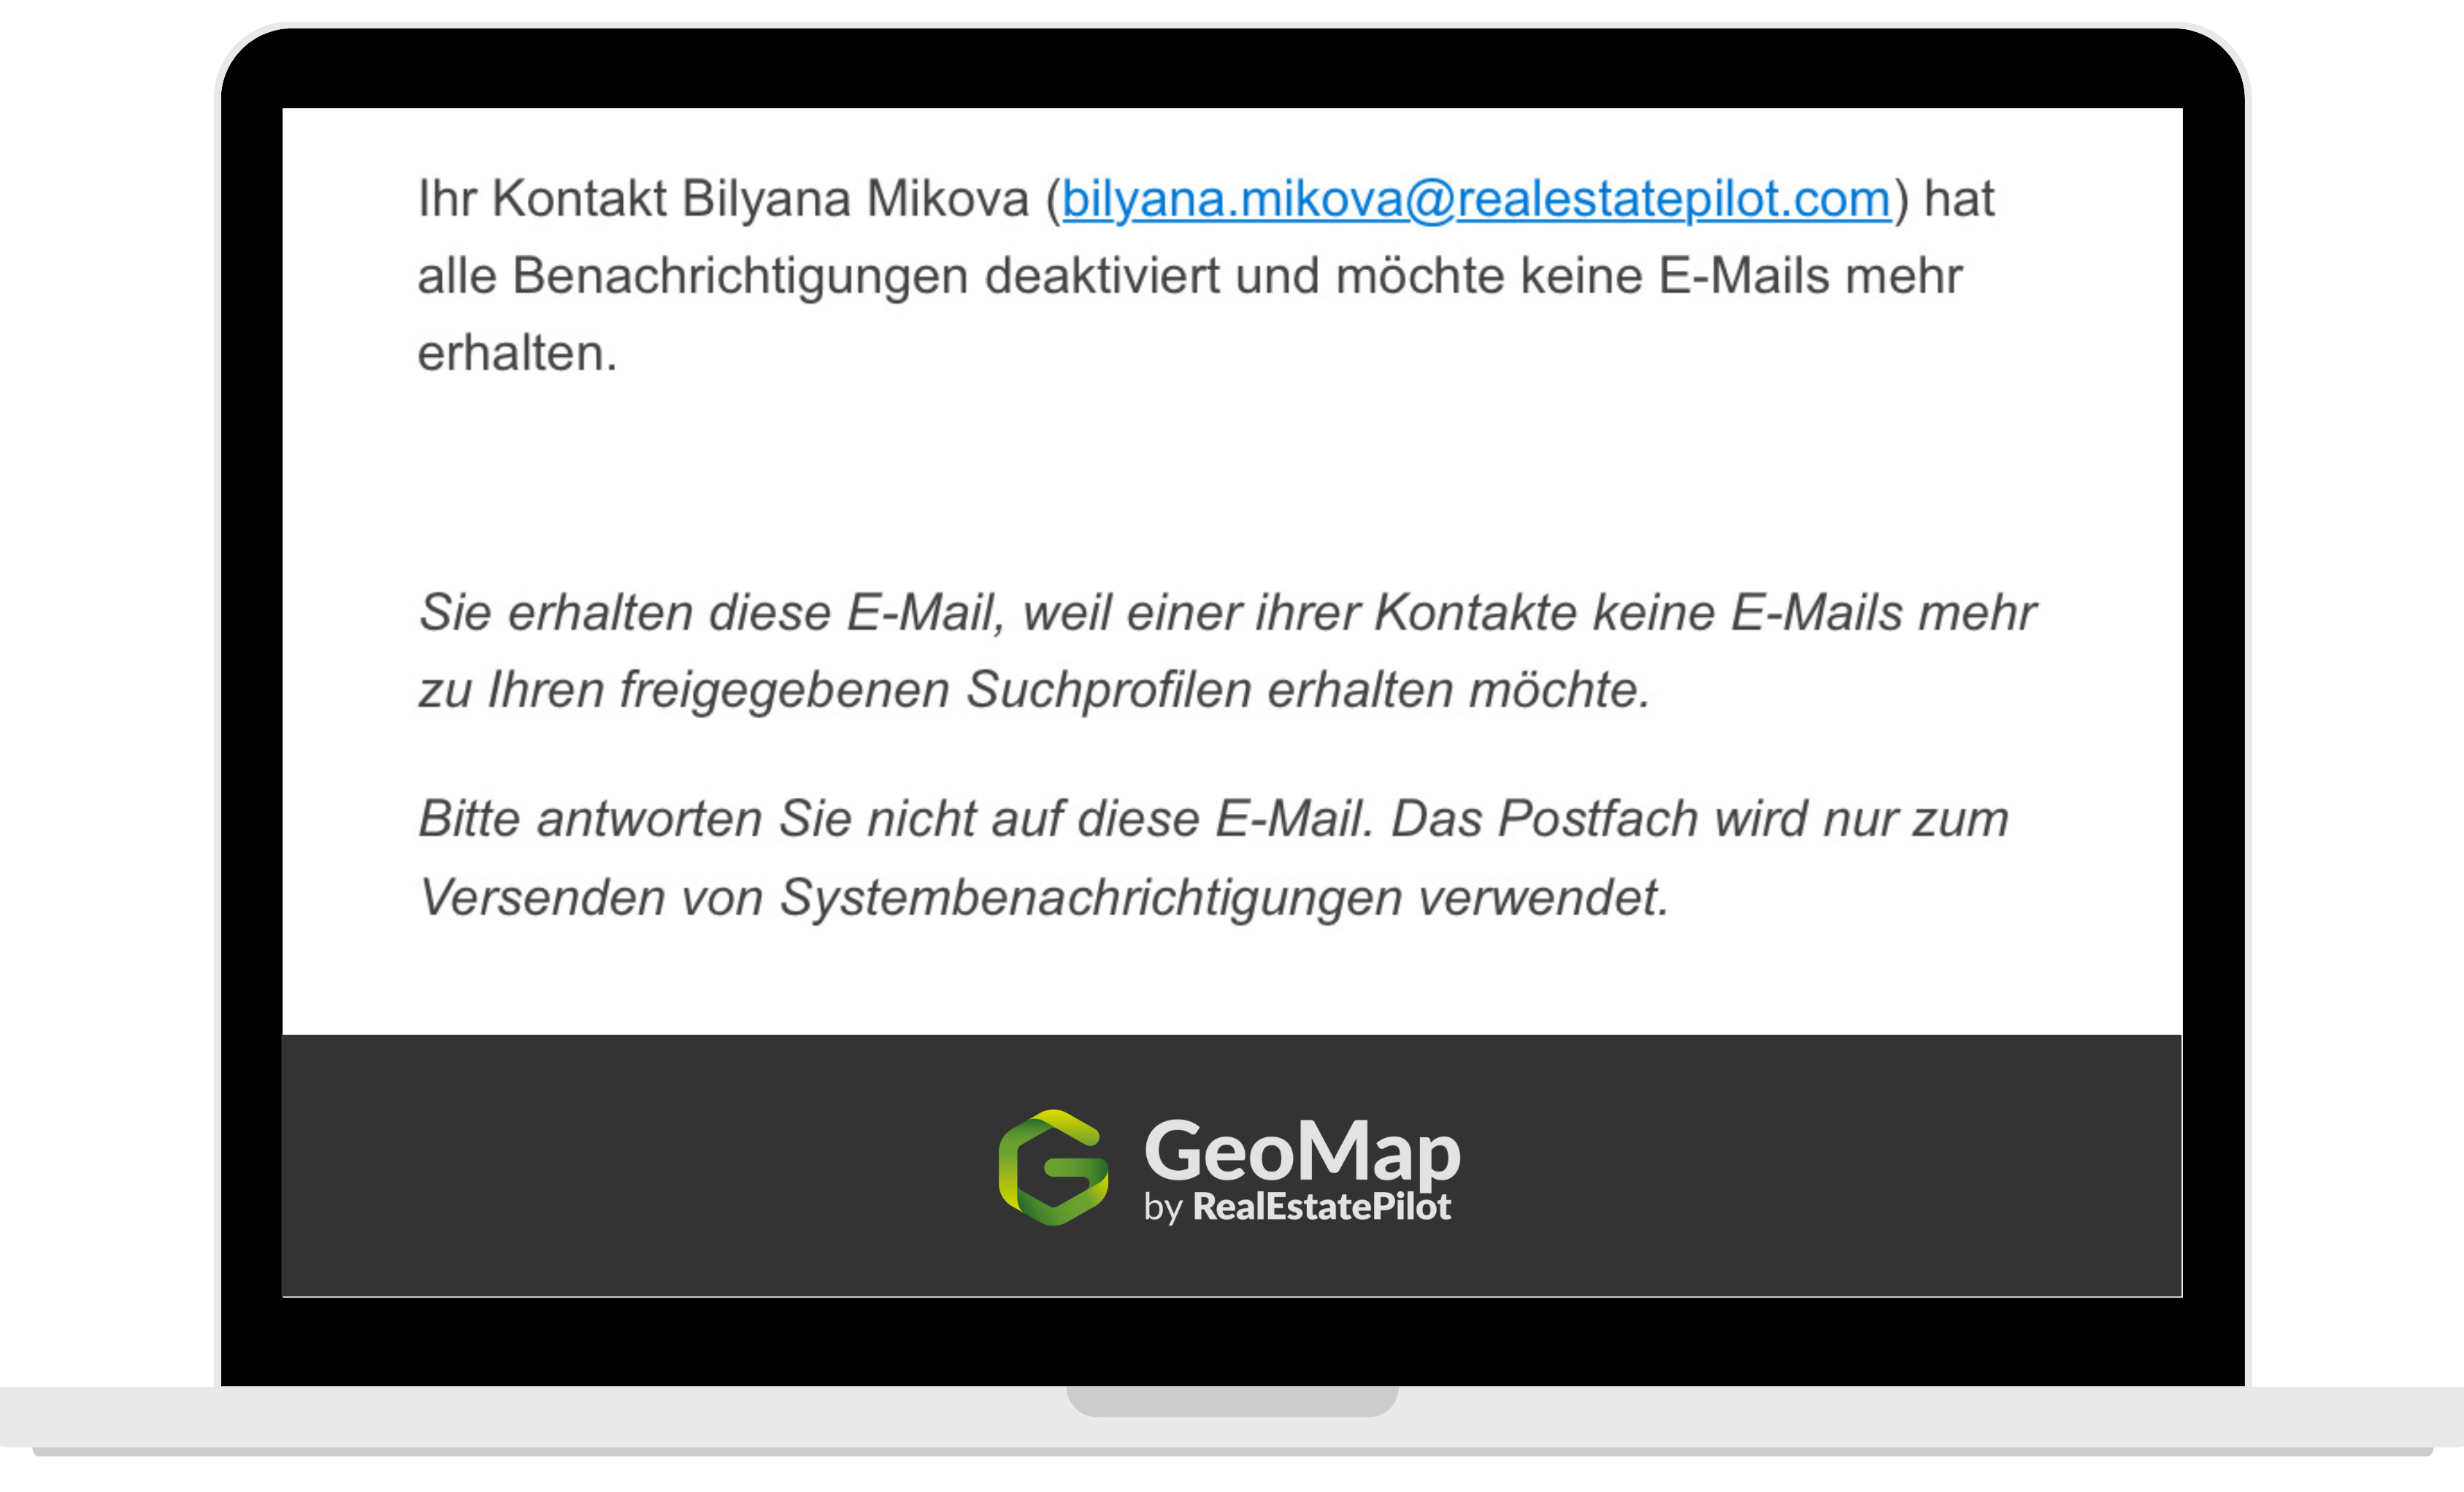 opt-out-info-geomap